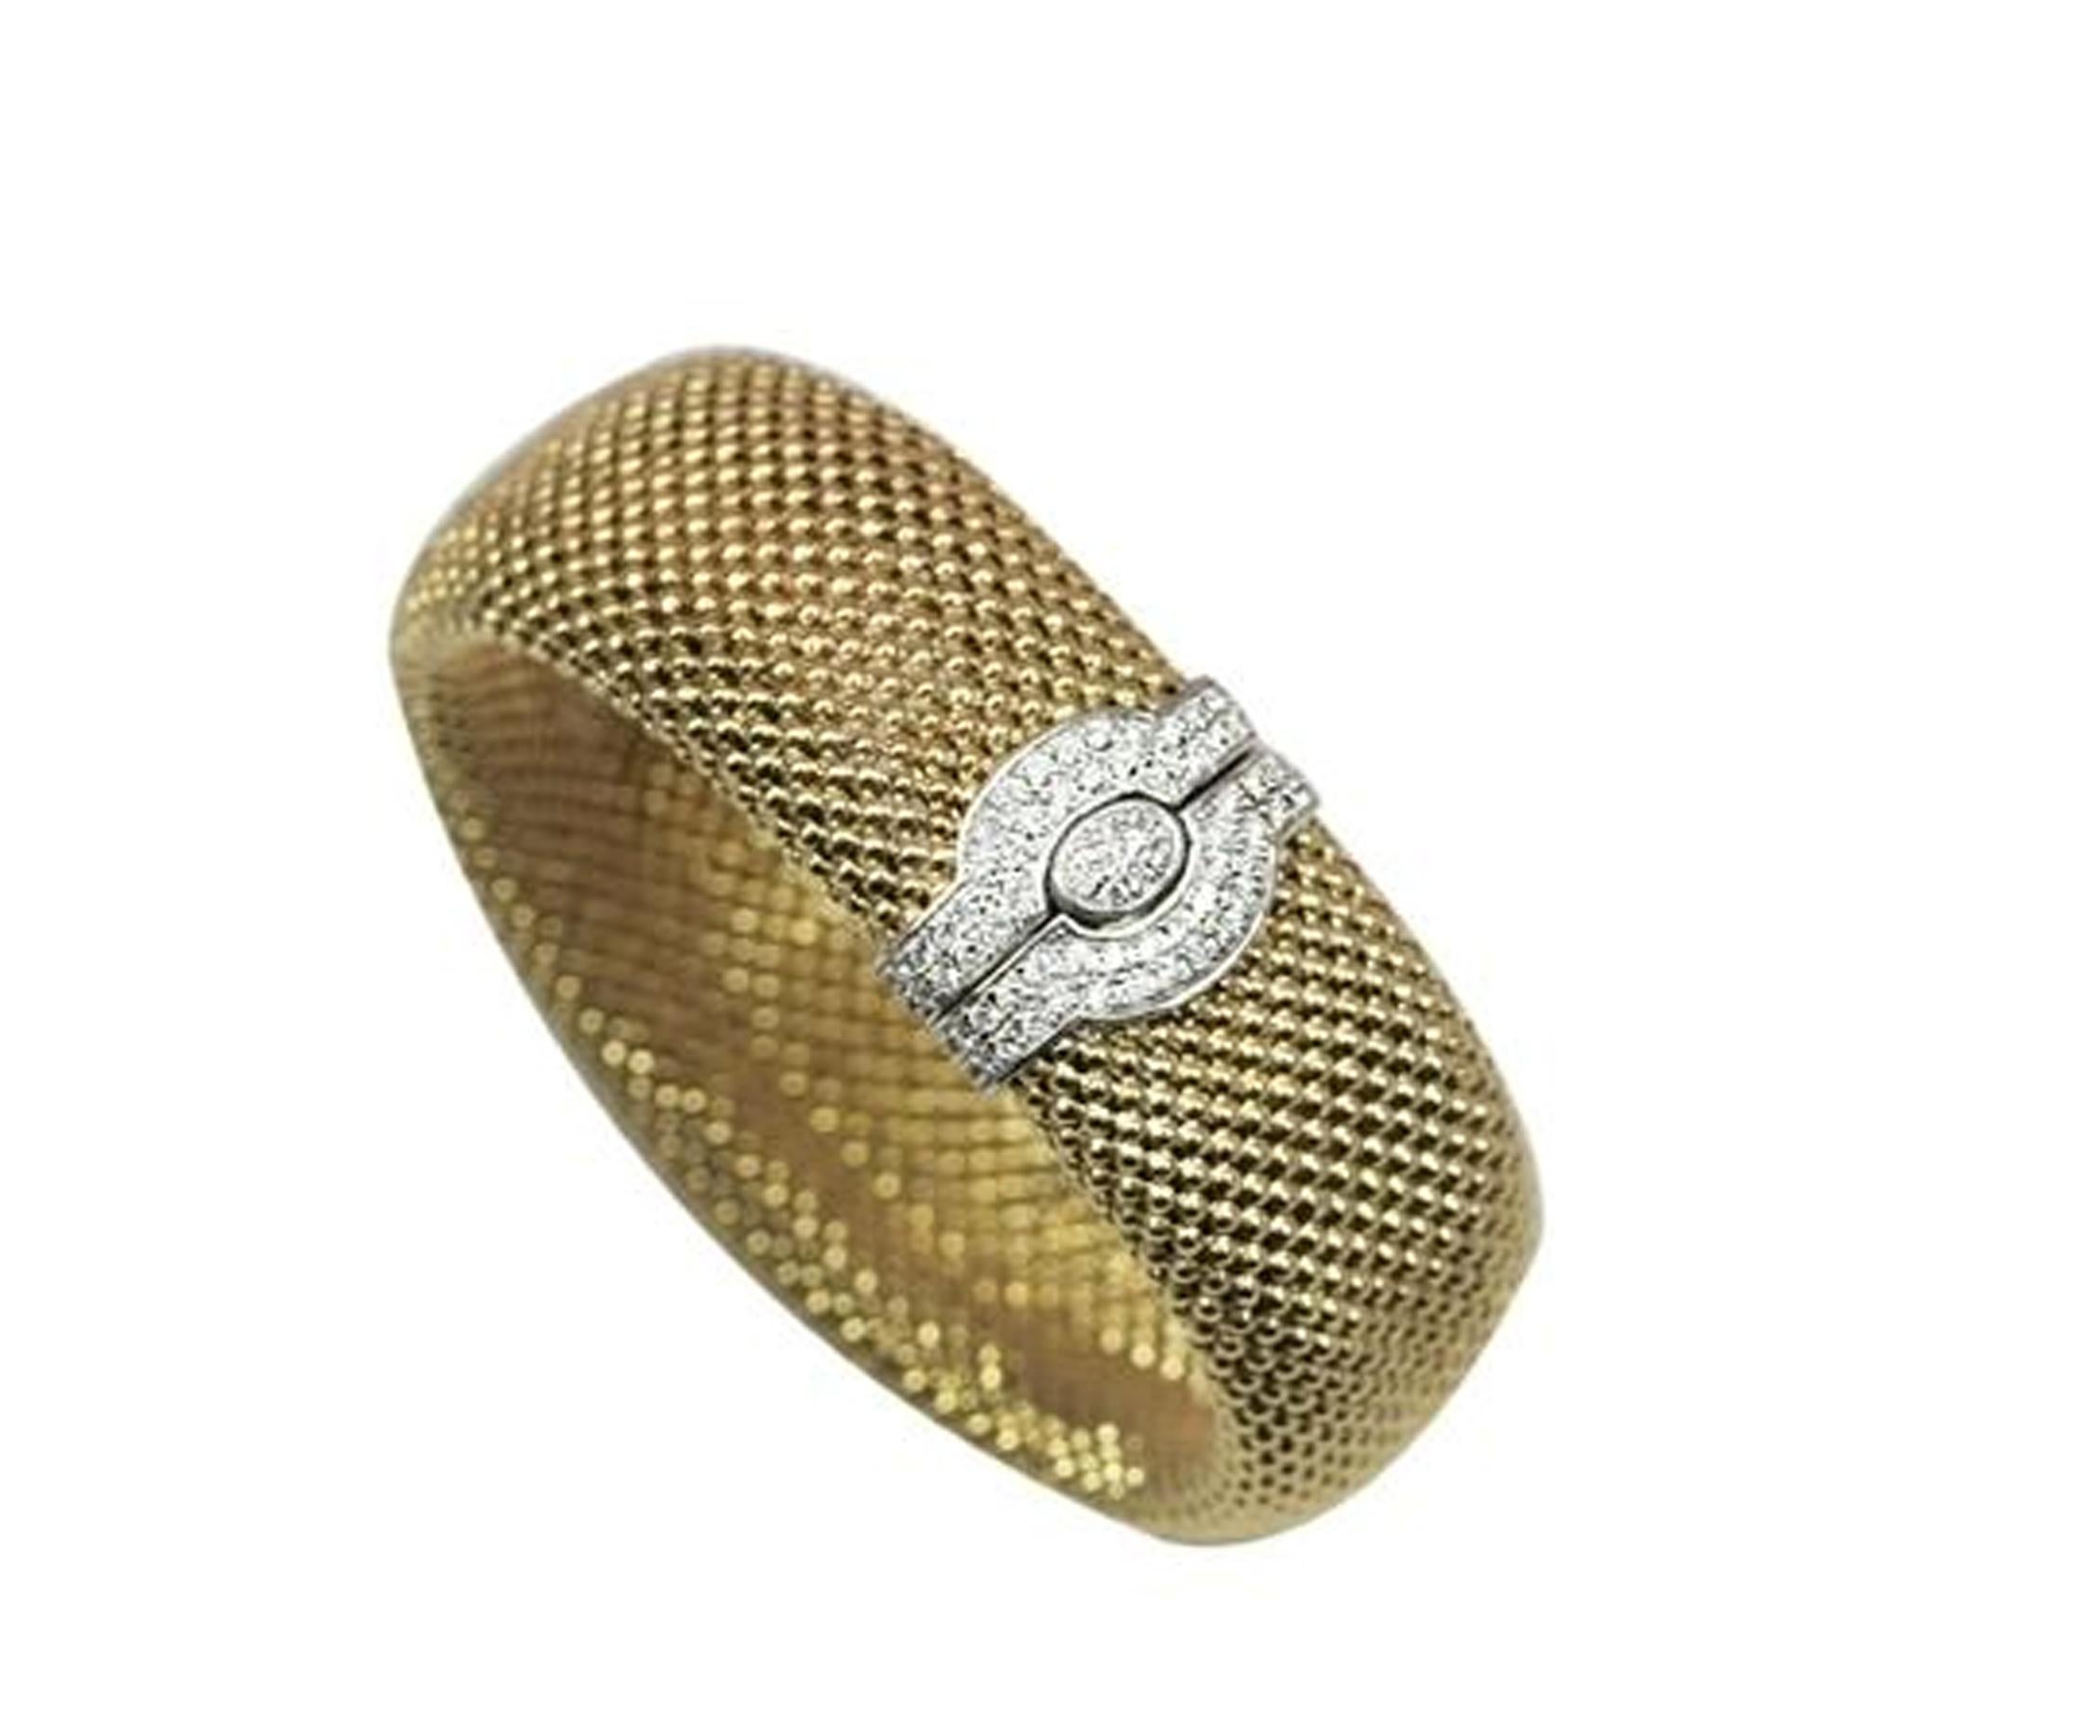 14karat Yellow Gold Flexible Wide Mesh Bracelet with White Diamond Pave Clasp 
 Handmade 14kt Yellow Gold flexible beaded mesh bracelet
Weighing 37.3 grams with a unique 14k.white gold  clasp containing 1.00ct pave set diamonds,VS2 clarity G-H